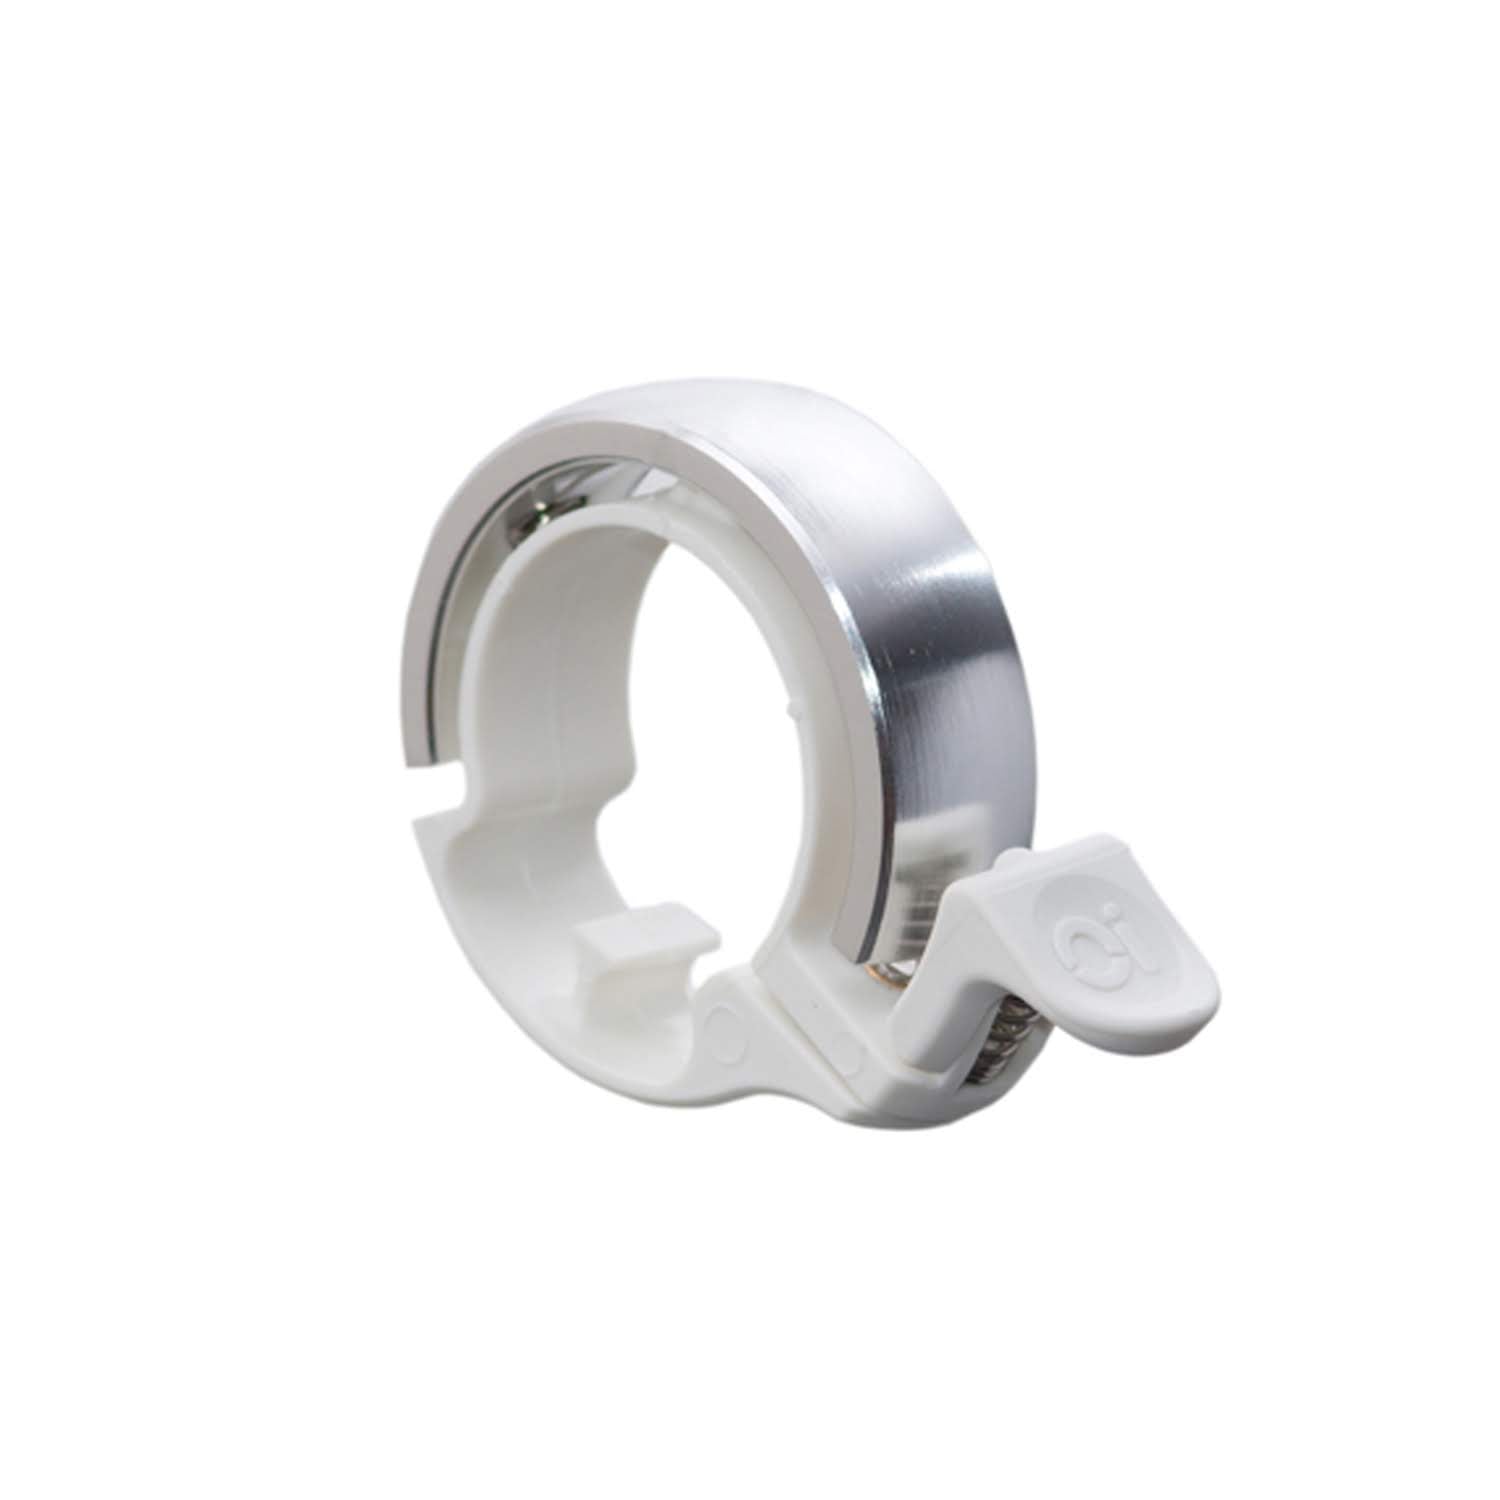 KNOG Oi Classic Bell White Mount